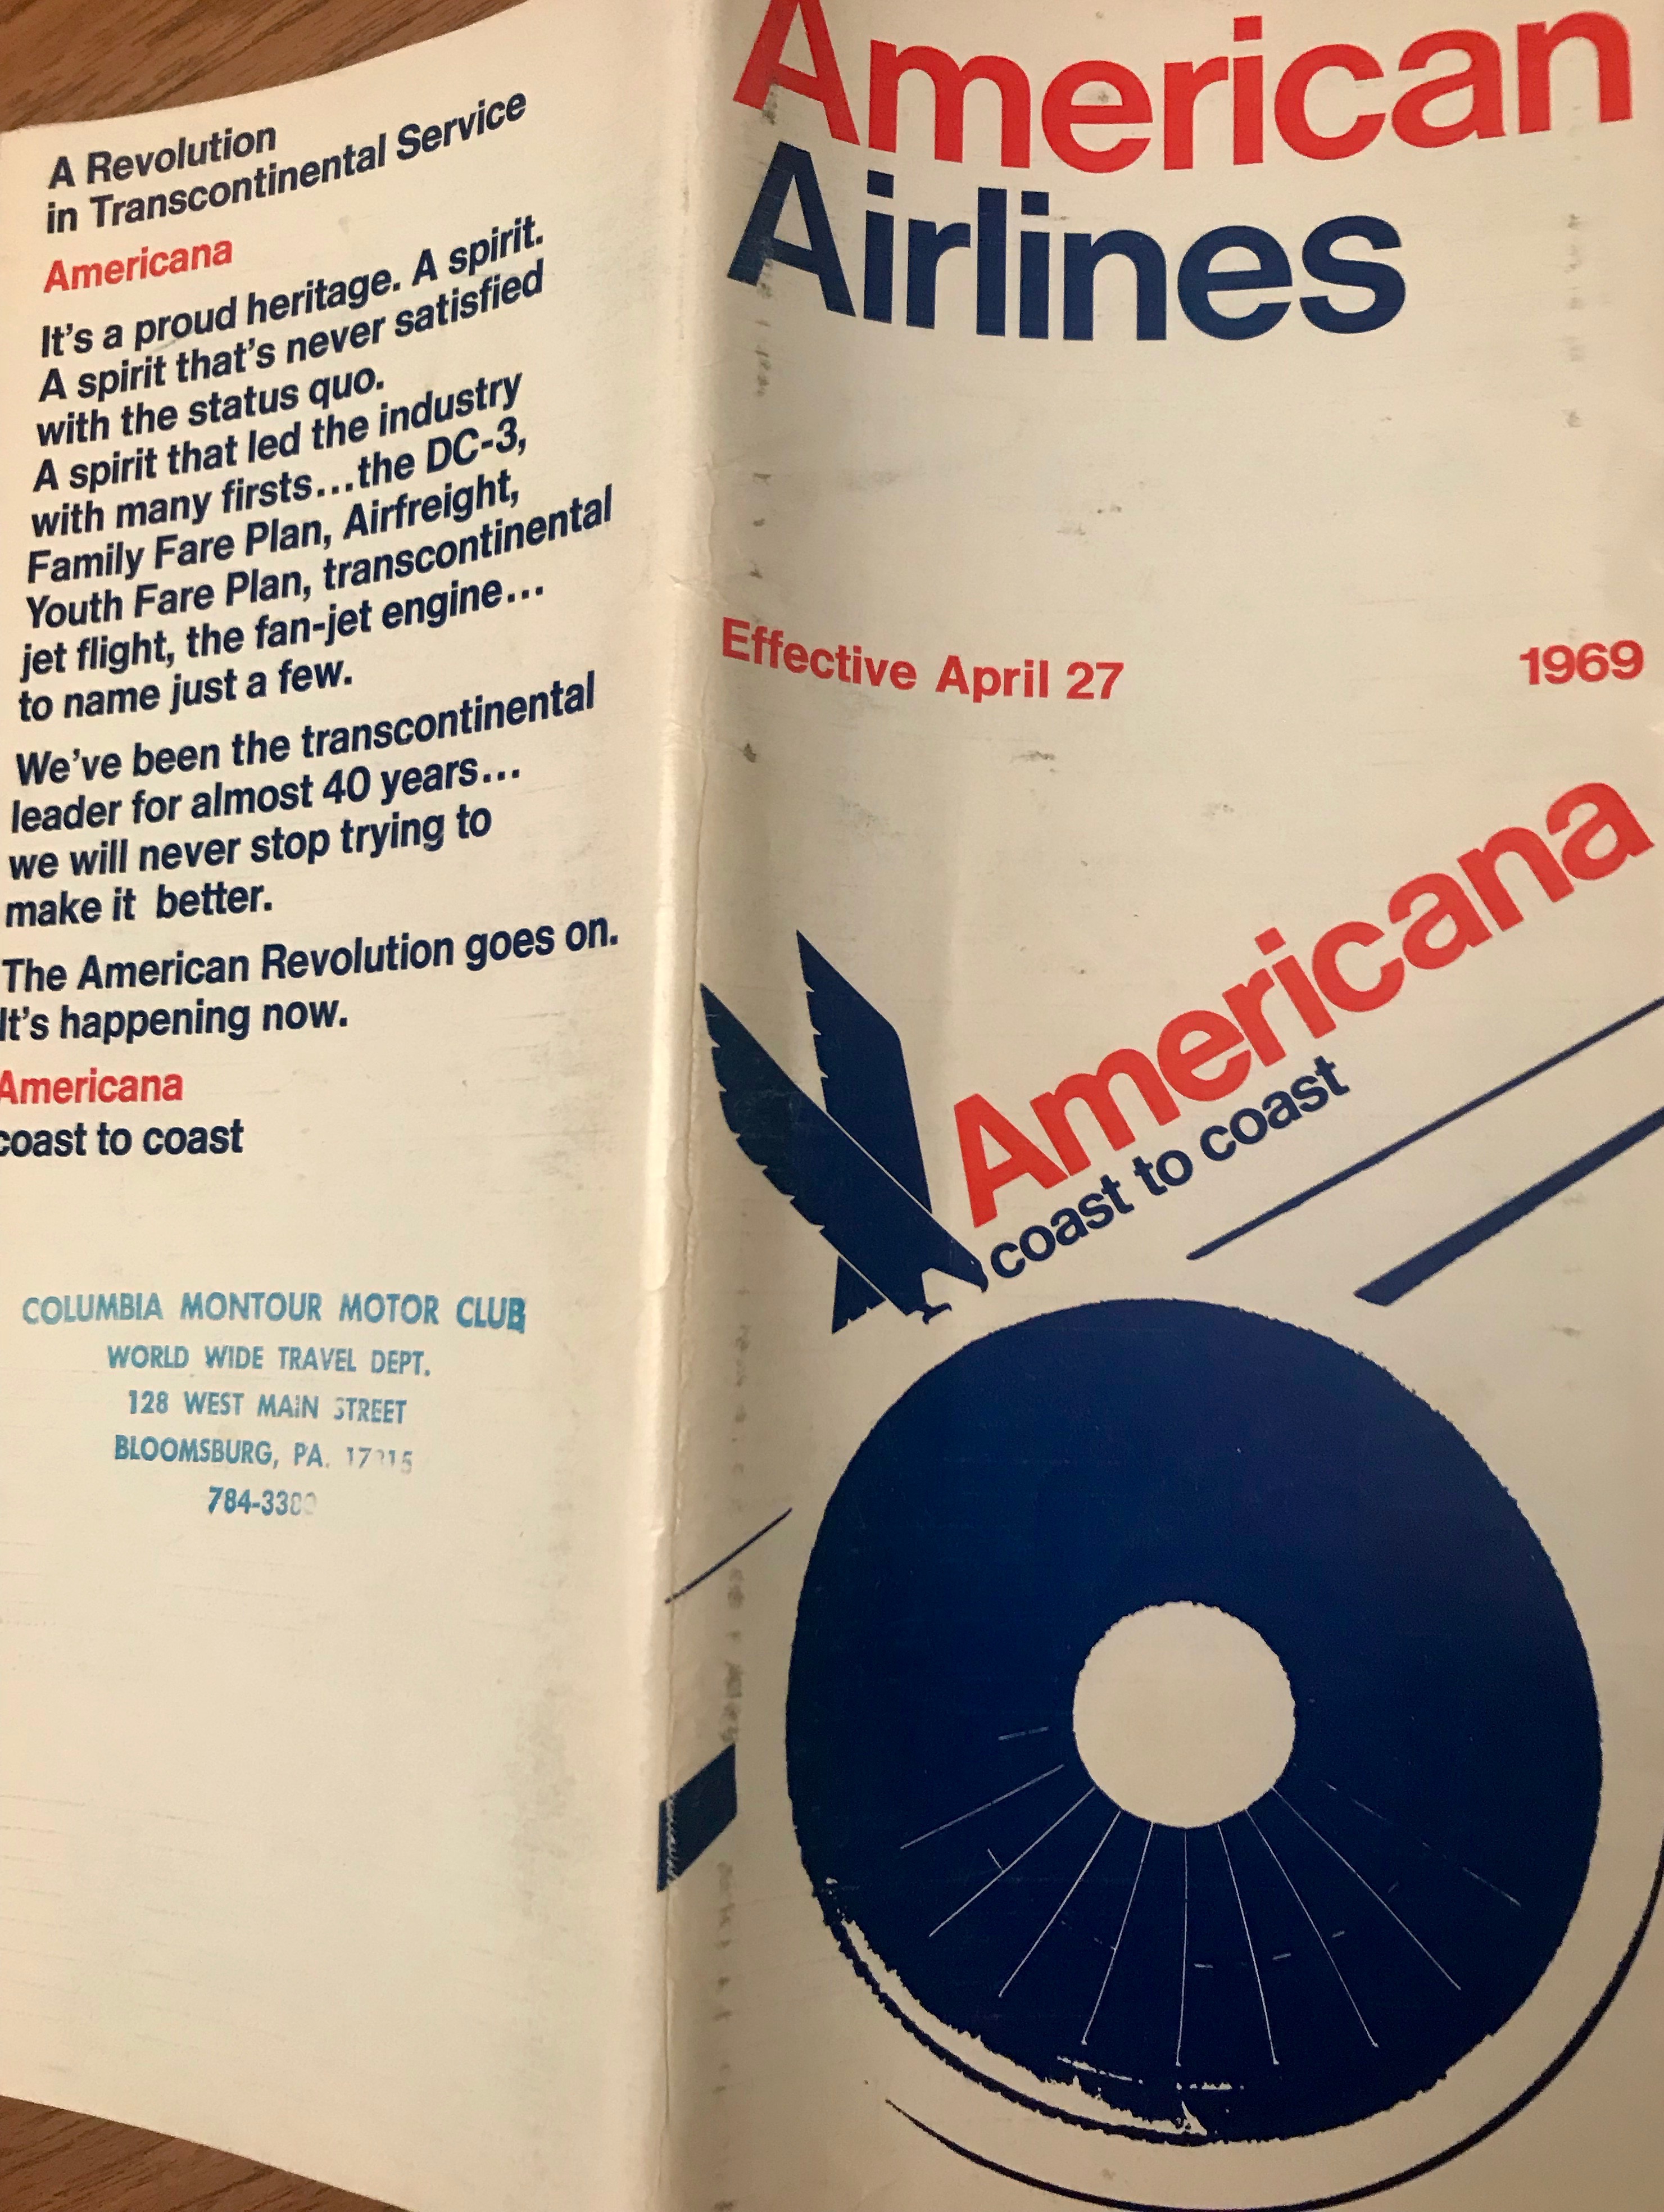 This is the front of an airline timetable booklet from American Airlines which was produced in 1969.  The print is bright blue and red in retro fonts and American's old logo with an eagle is also present. 